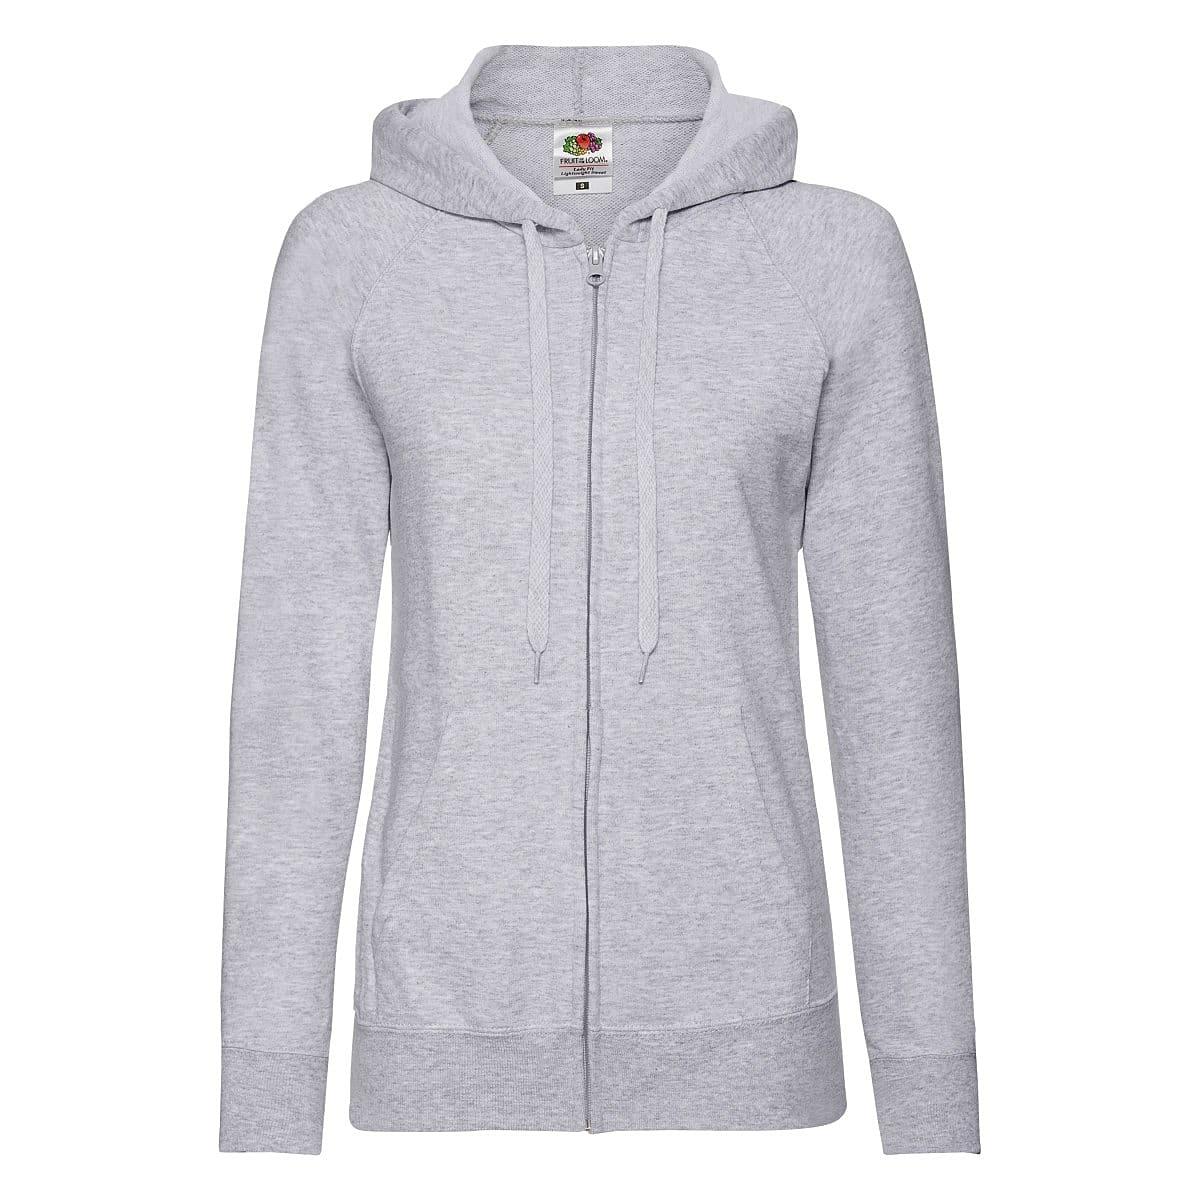 Fruit Of The Loom Lady-Fit Lightweight Full-Zip Hoodie in Heather Grey (Product Code: 62150)